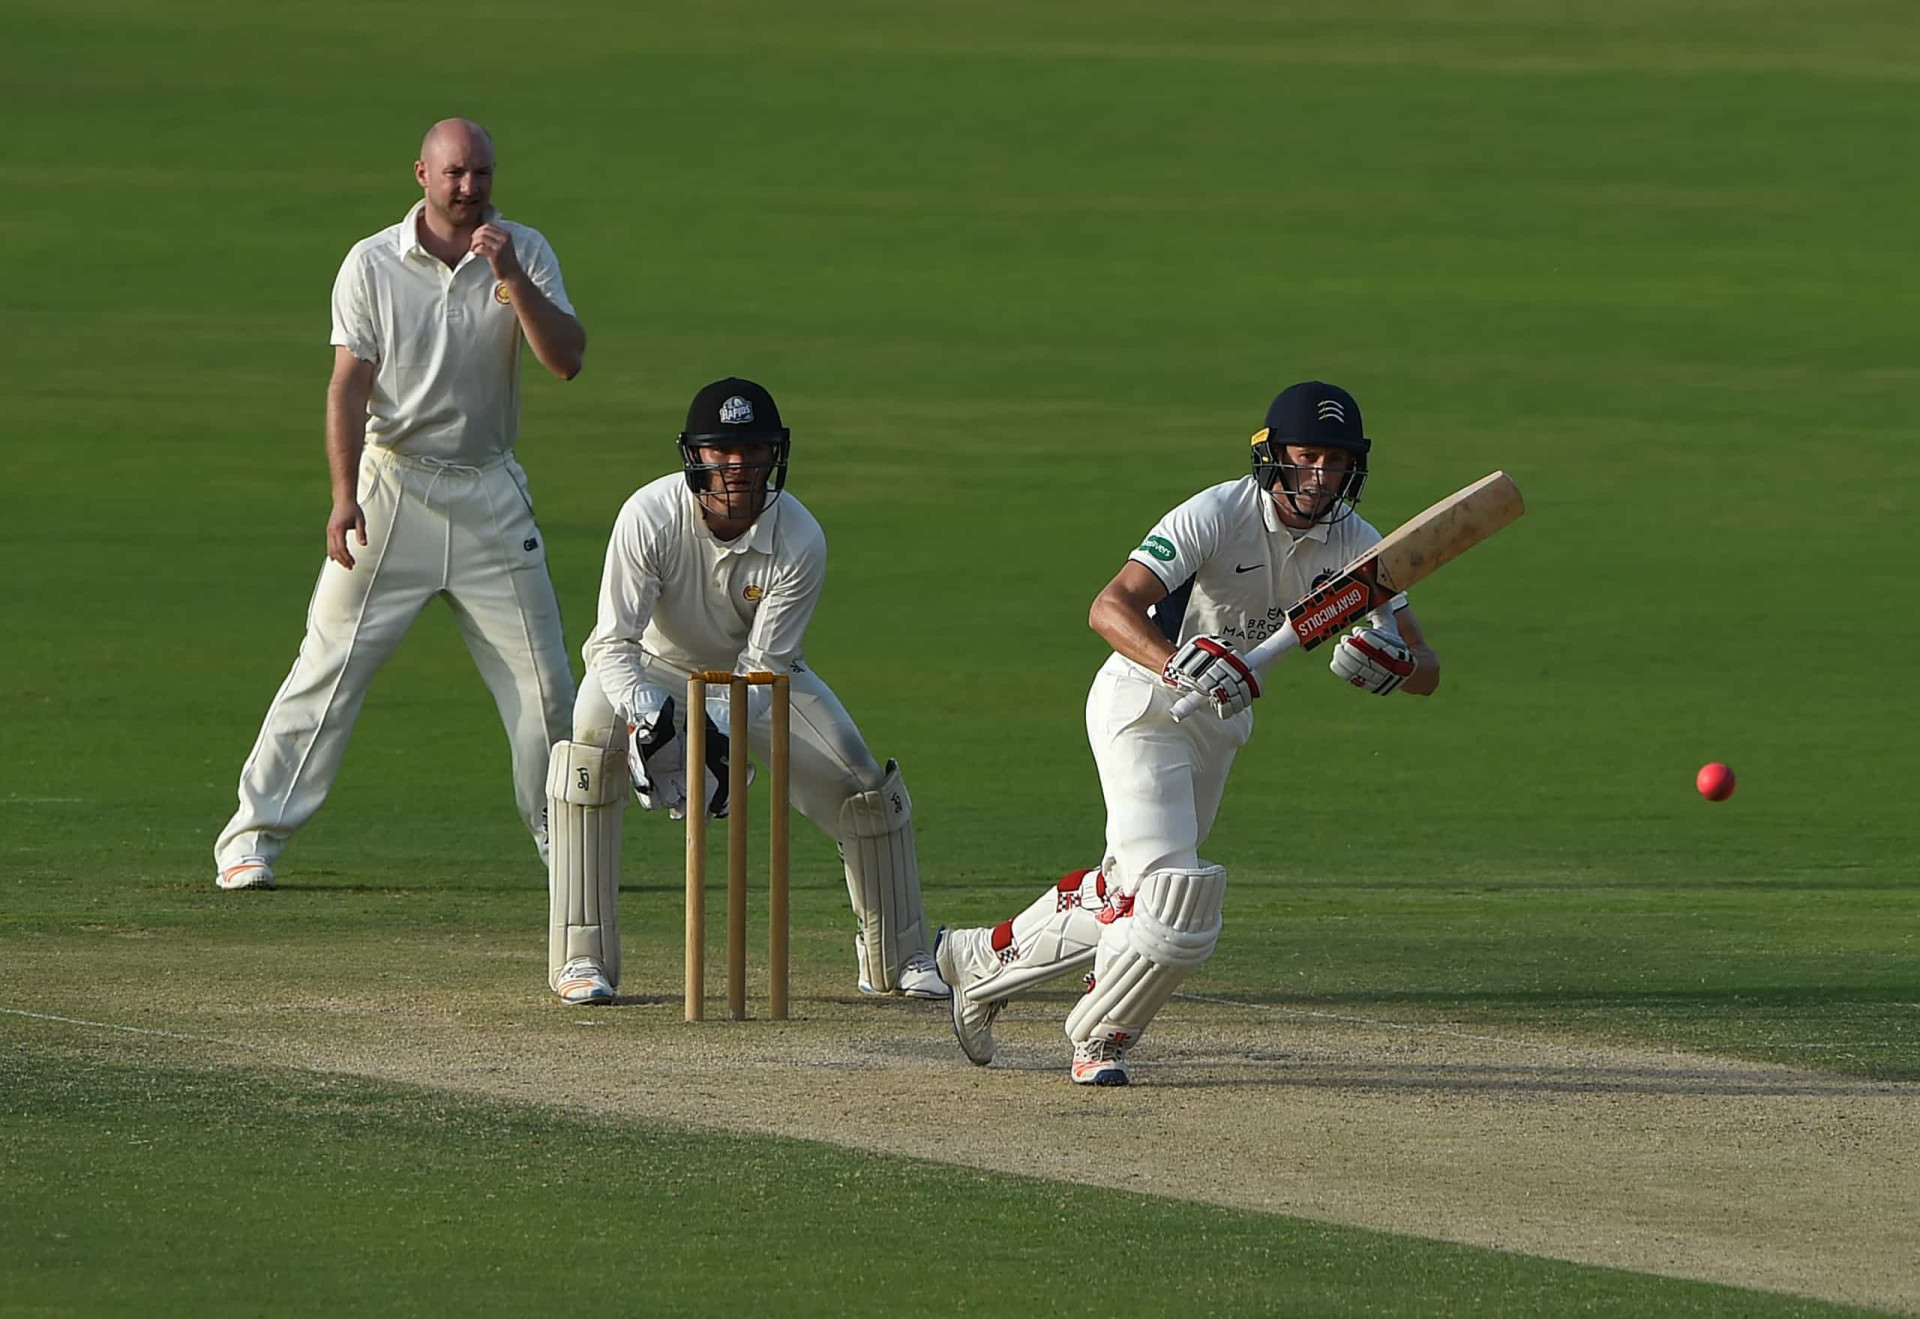 <p>Cricket is referenced in England as early as 1597. By the middle of the 17th century, "village cricket"—notably Hambledon Club in Hampshire—developed to the point where "county teams" were being formed. By the 18th century, the game had been exported to other parts of the globe, though it never caught on in Canada or the United States.</p><p><a href="https://www.msn.com/en-ph/community/channel/vid-7xx8mnucu55yw63we9va2gwr7uihbxwc68fxqp25x6tg4ftibpra?cvid=94631541bc0f4f89bfd59158d696ad7e">Follow us and access great exclusive content every day</a></p>